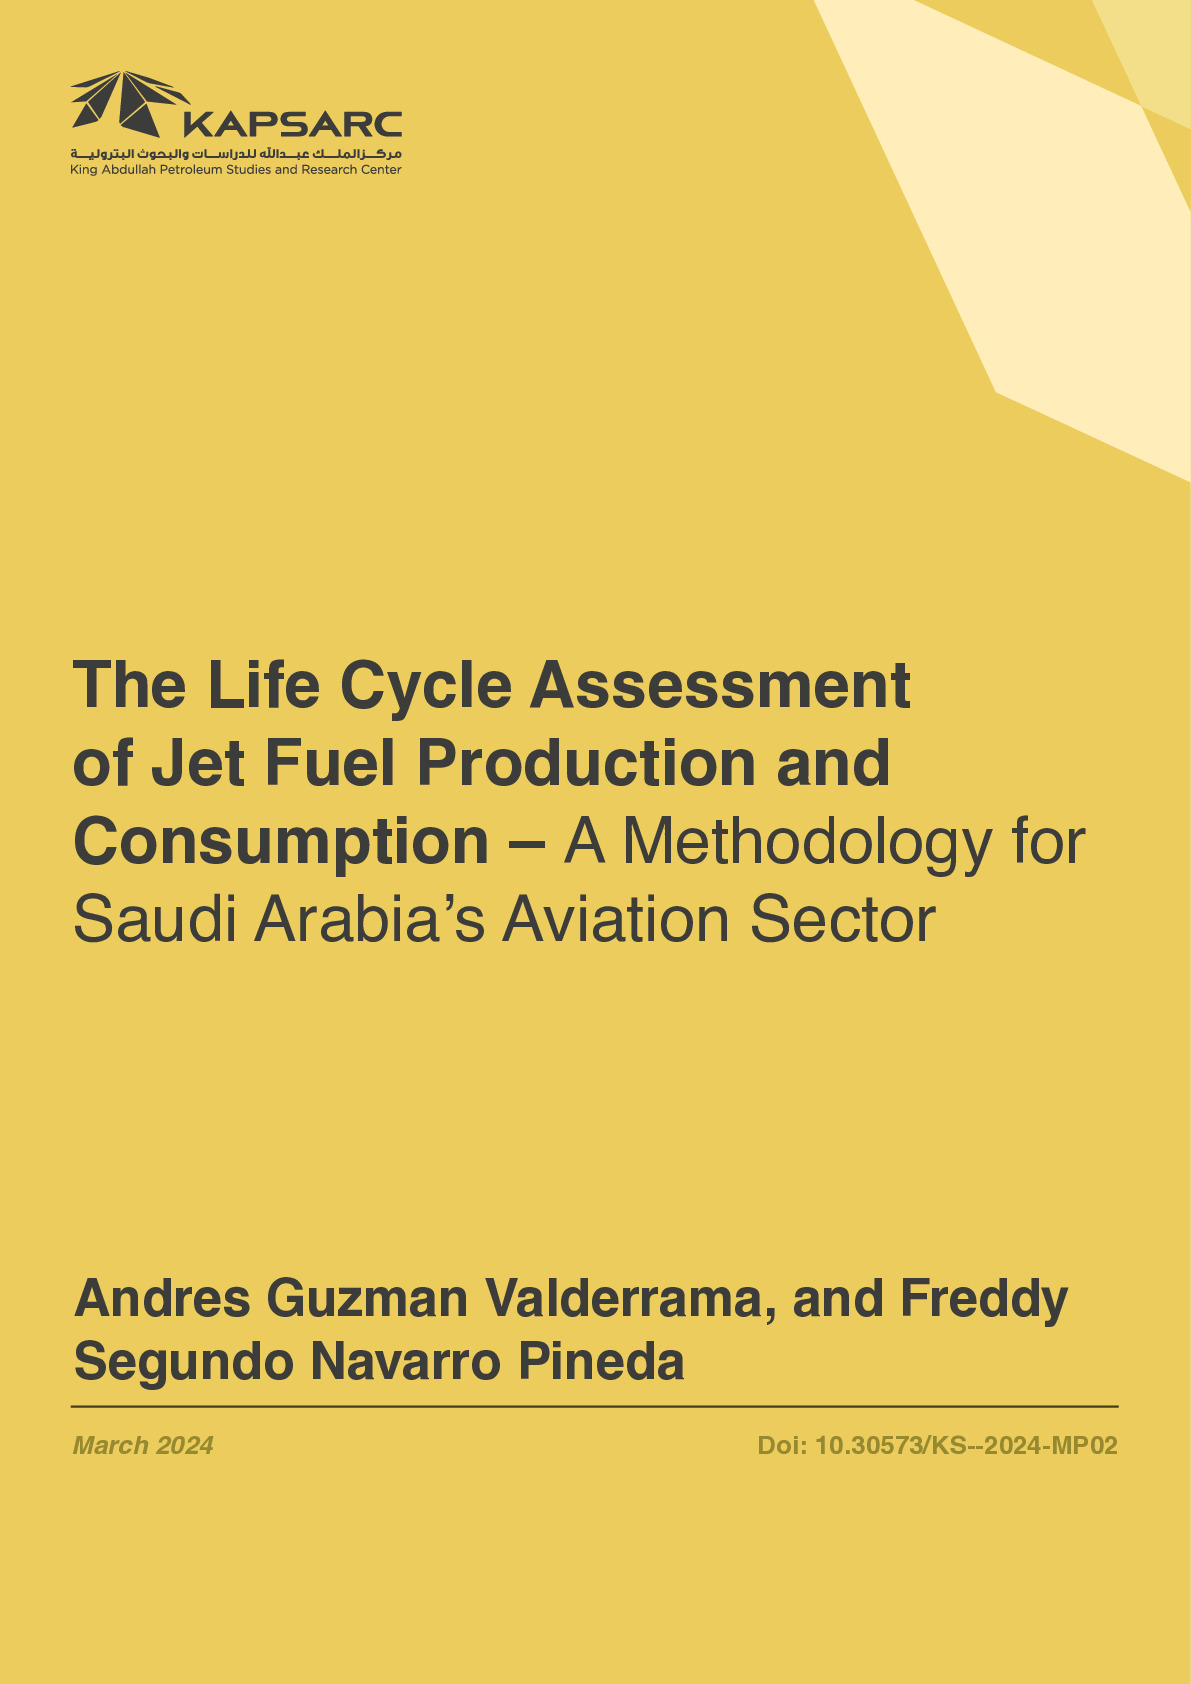 The Life Cycle Assessment of Jet Fuel Production and Consumption – A Methodology for Saudi Arabia’s Aviation Sector